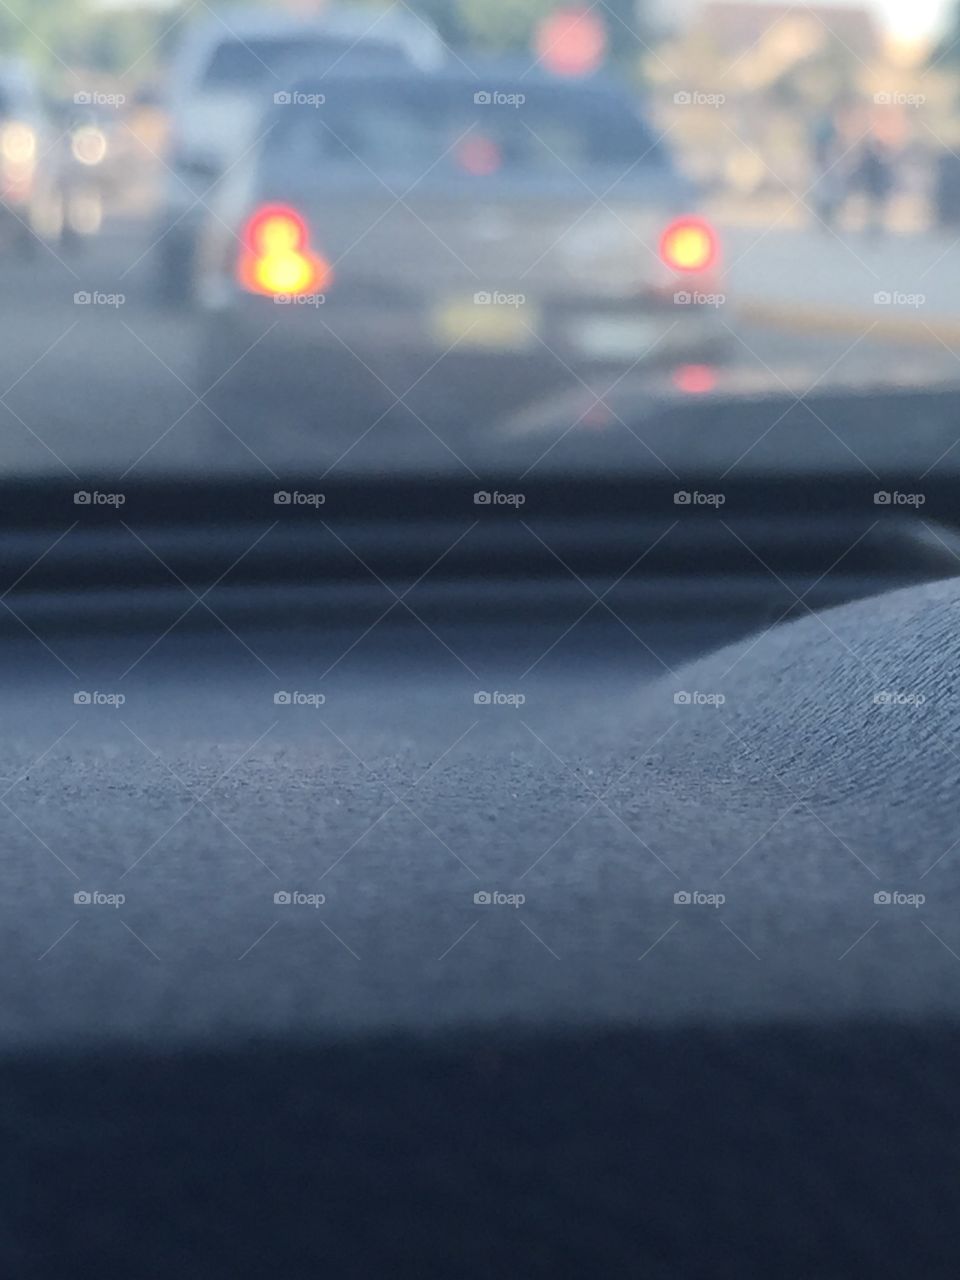 From the Dashboard